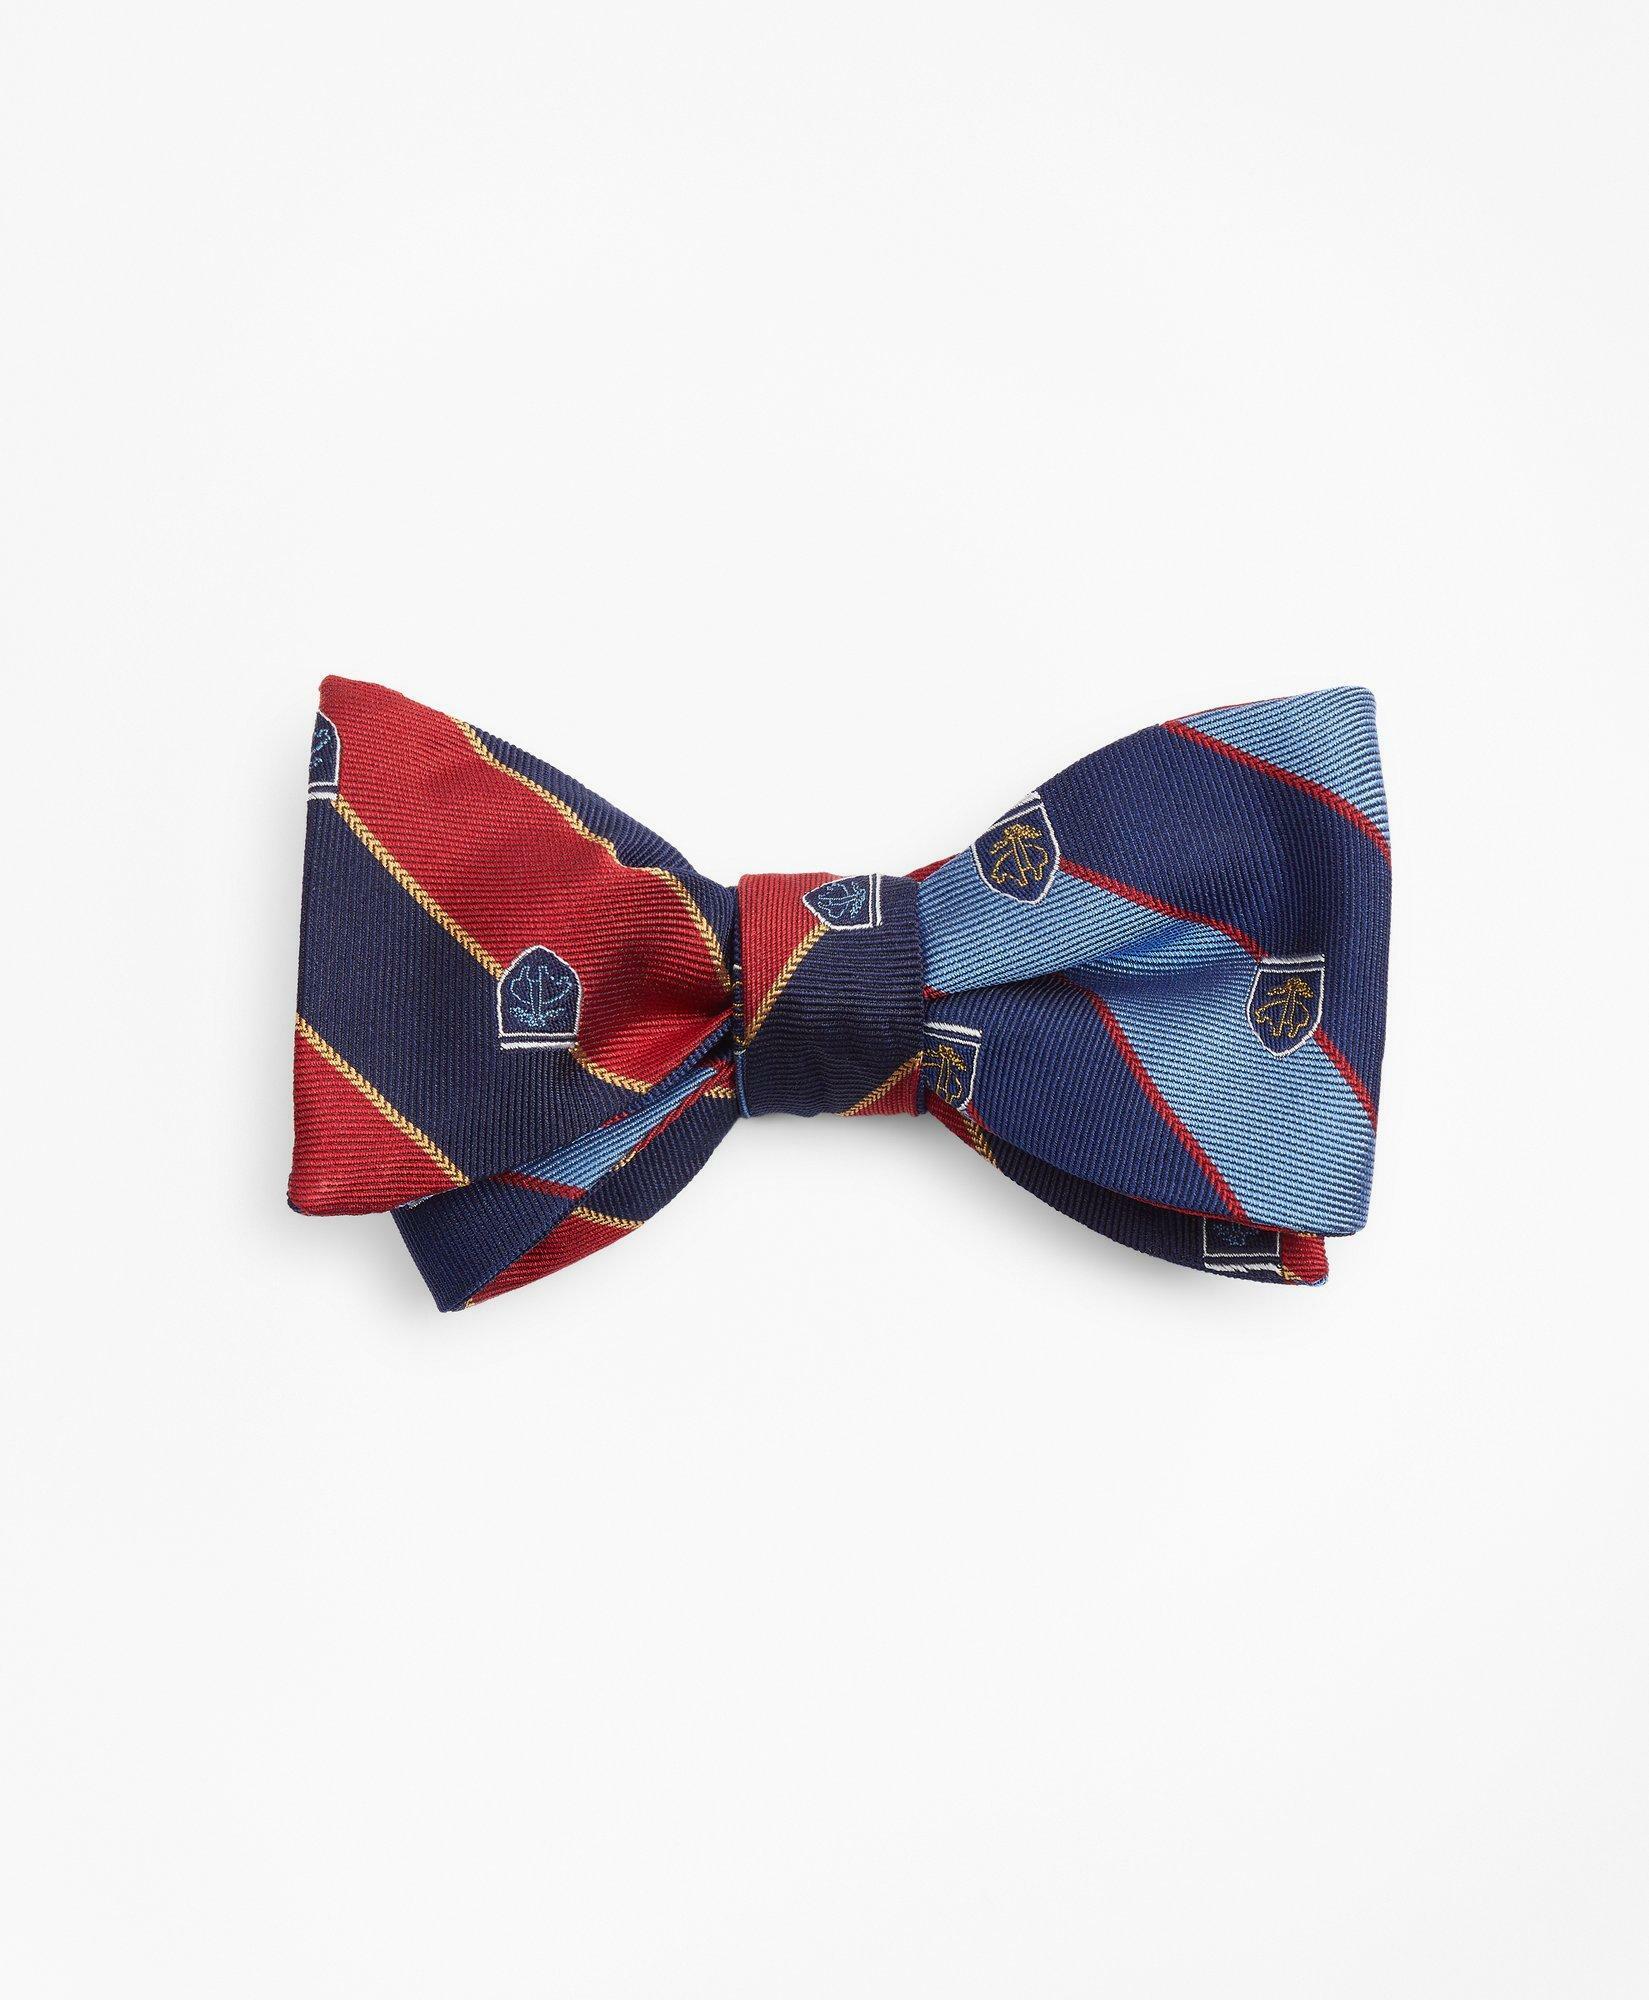 Brooks Brothers Men's Rugby Stripe with Fleece Shield Reversible Bow Tie | Red